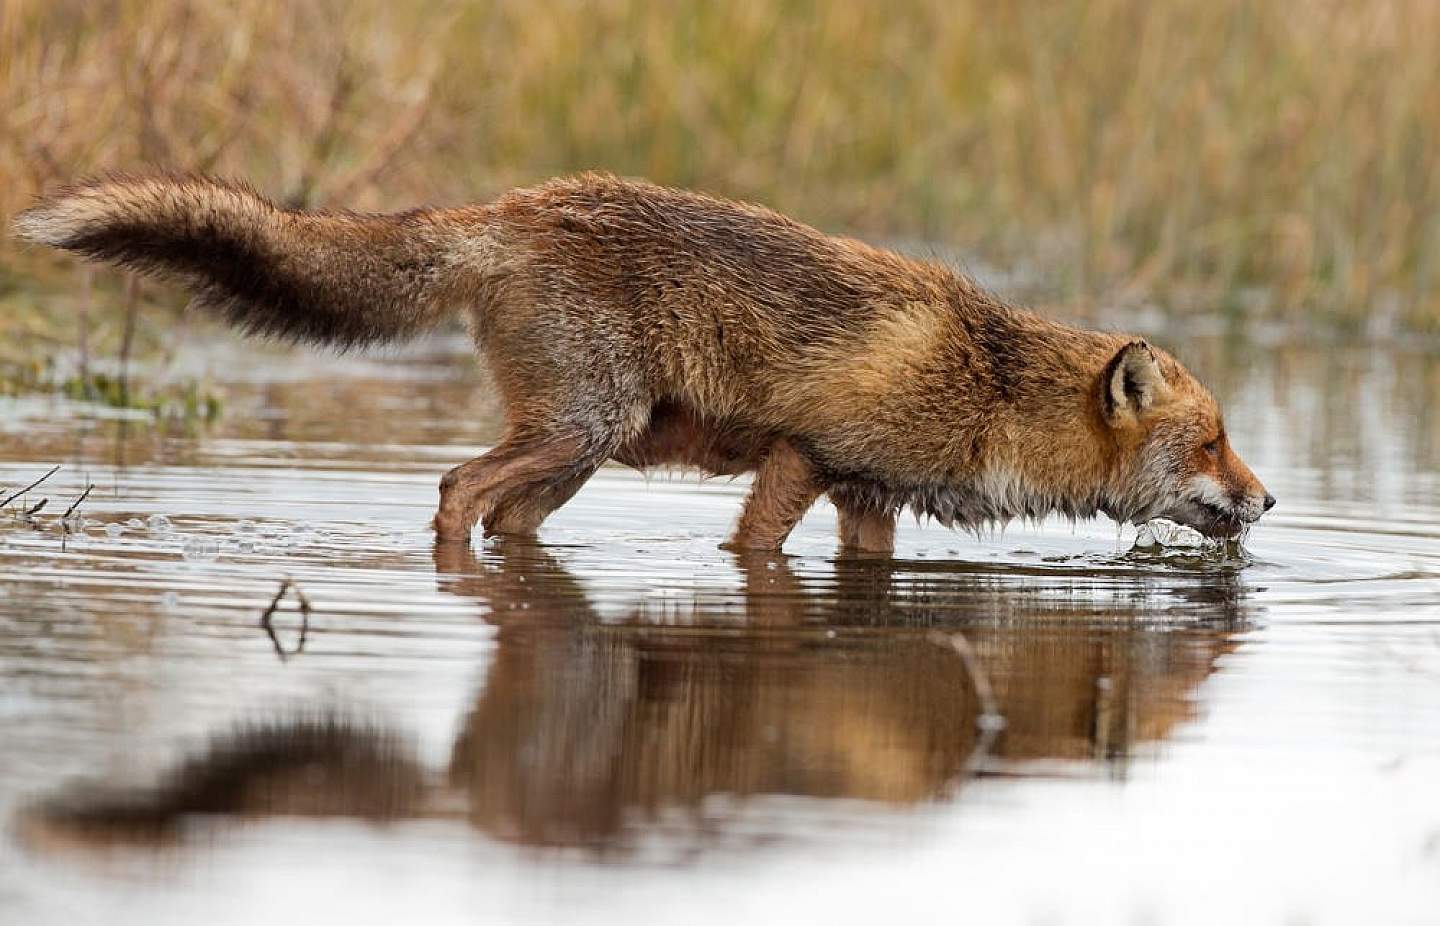 A fox drinking water out of a stream